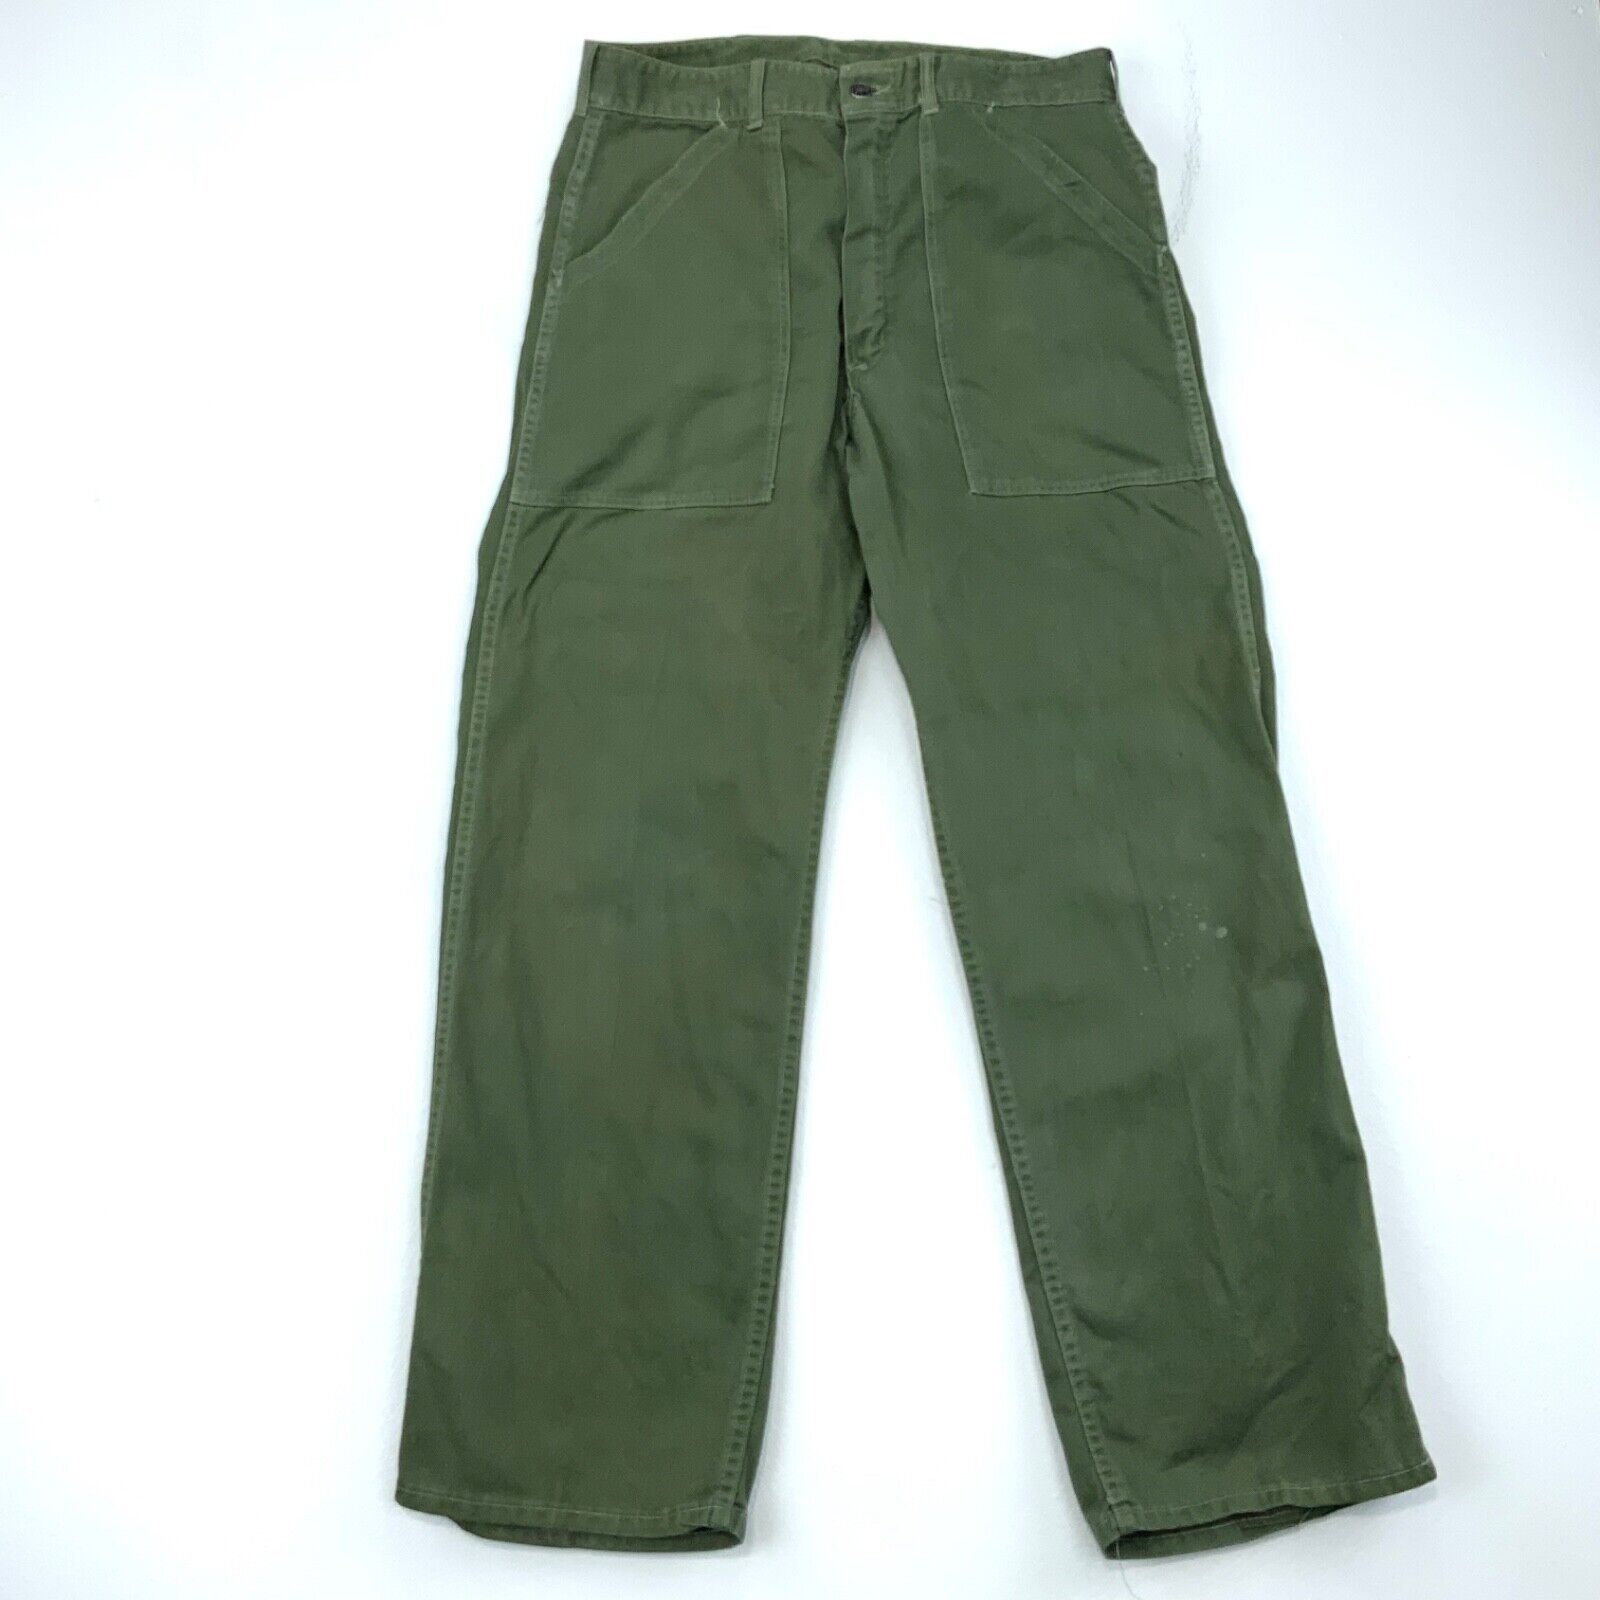 Vintage Us Military Pre Og-107 Hbt 13 Star Trousers Size 31 x 30 Green